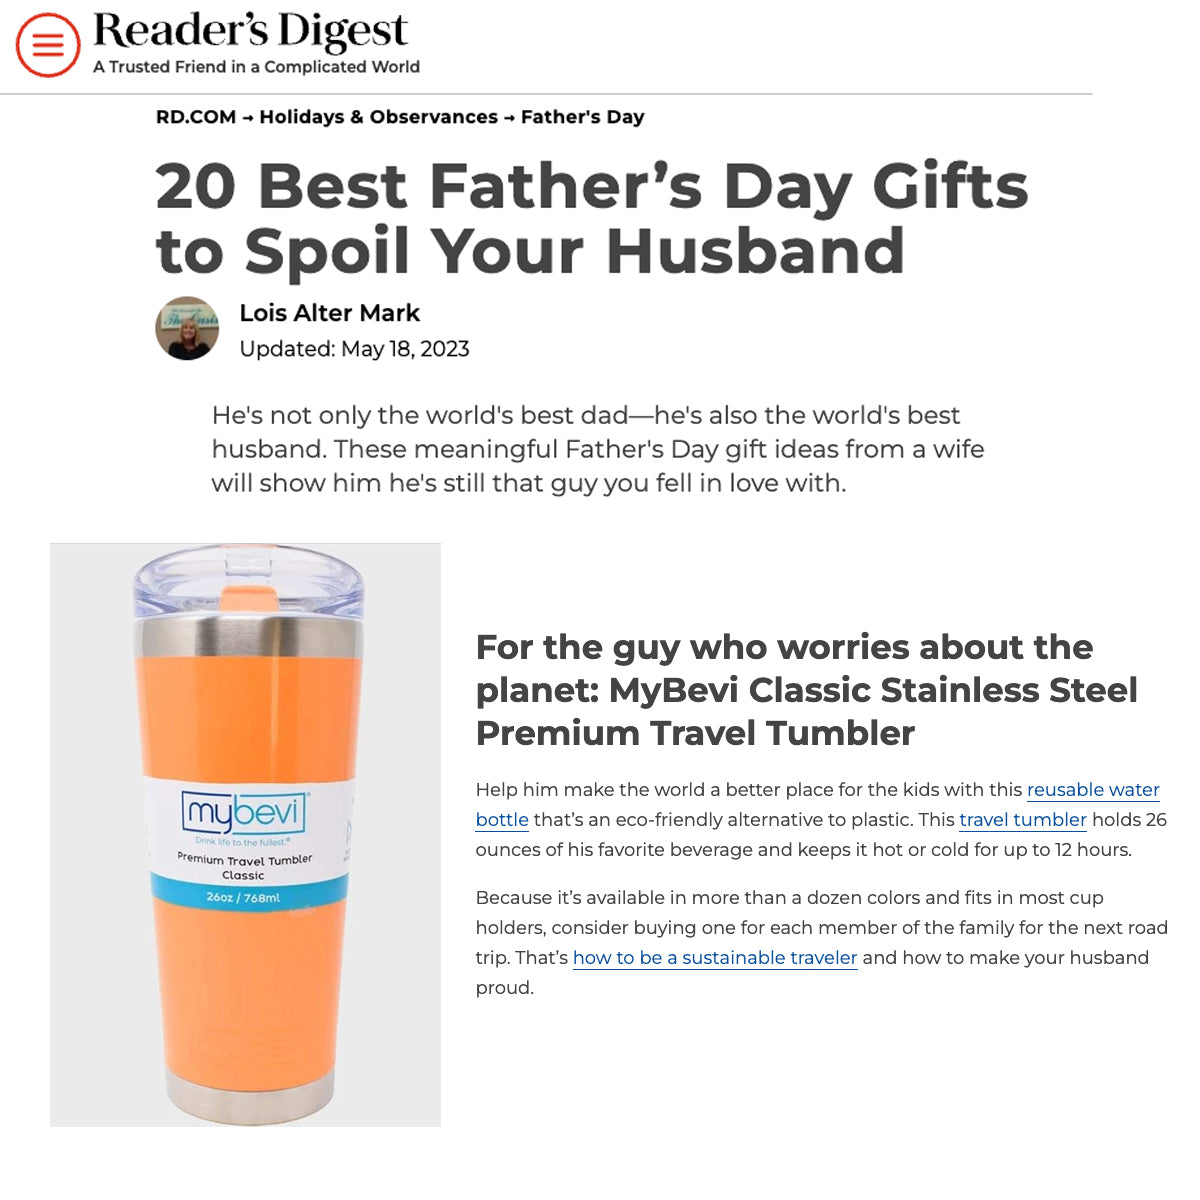 MyBevi is one of Reader's Digest 20 best gifts to spoil your husband in 2023